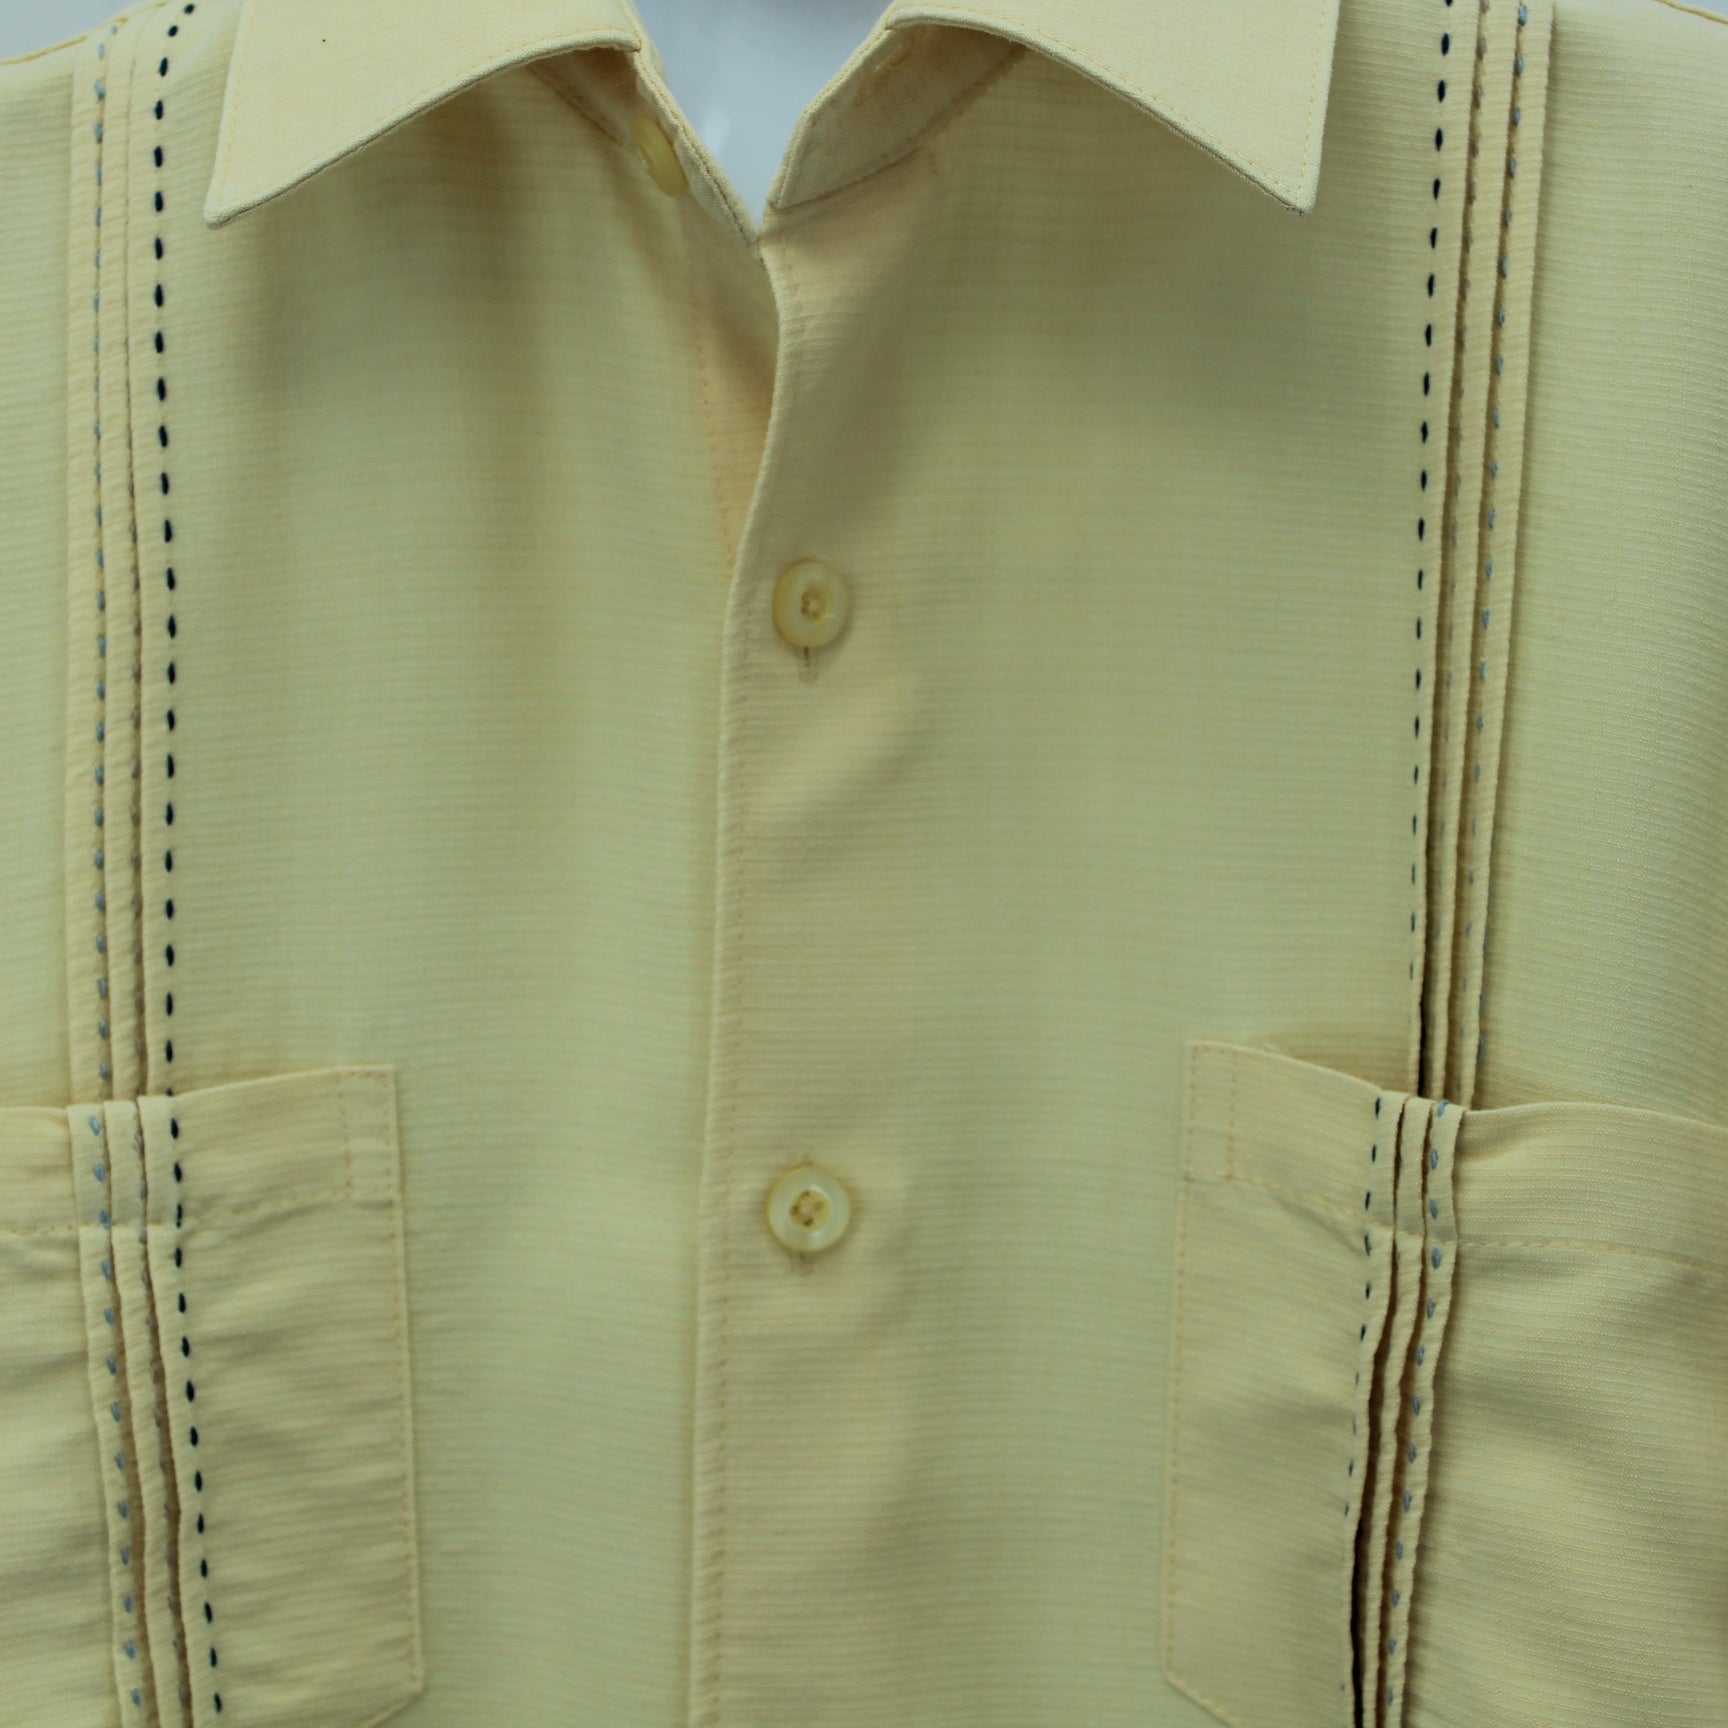 Cubavera Shirt Cream Color Tucked Blue Stitched Front M/M Chest 45" textured fabric nice weight